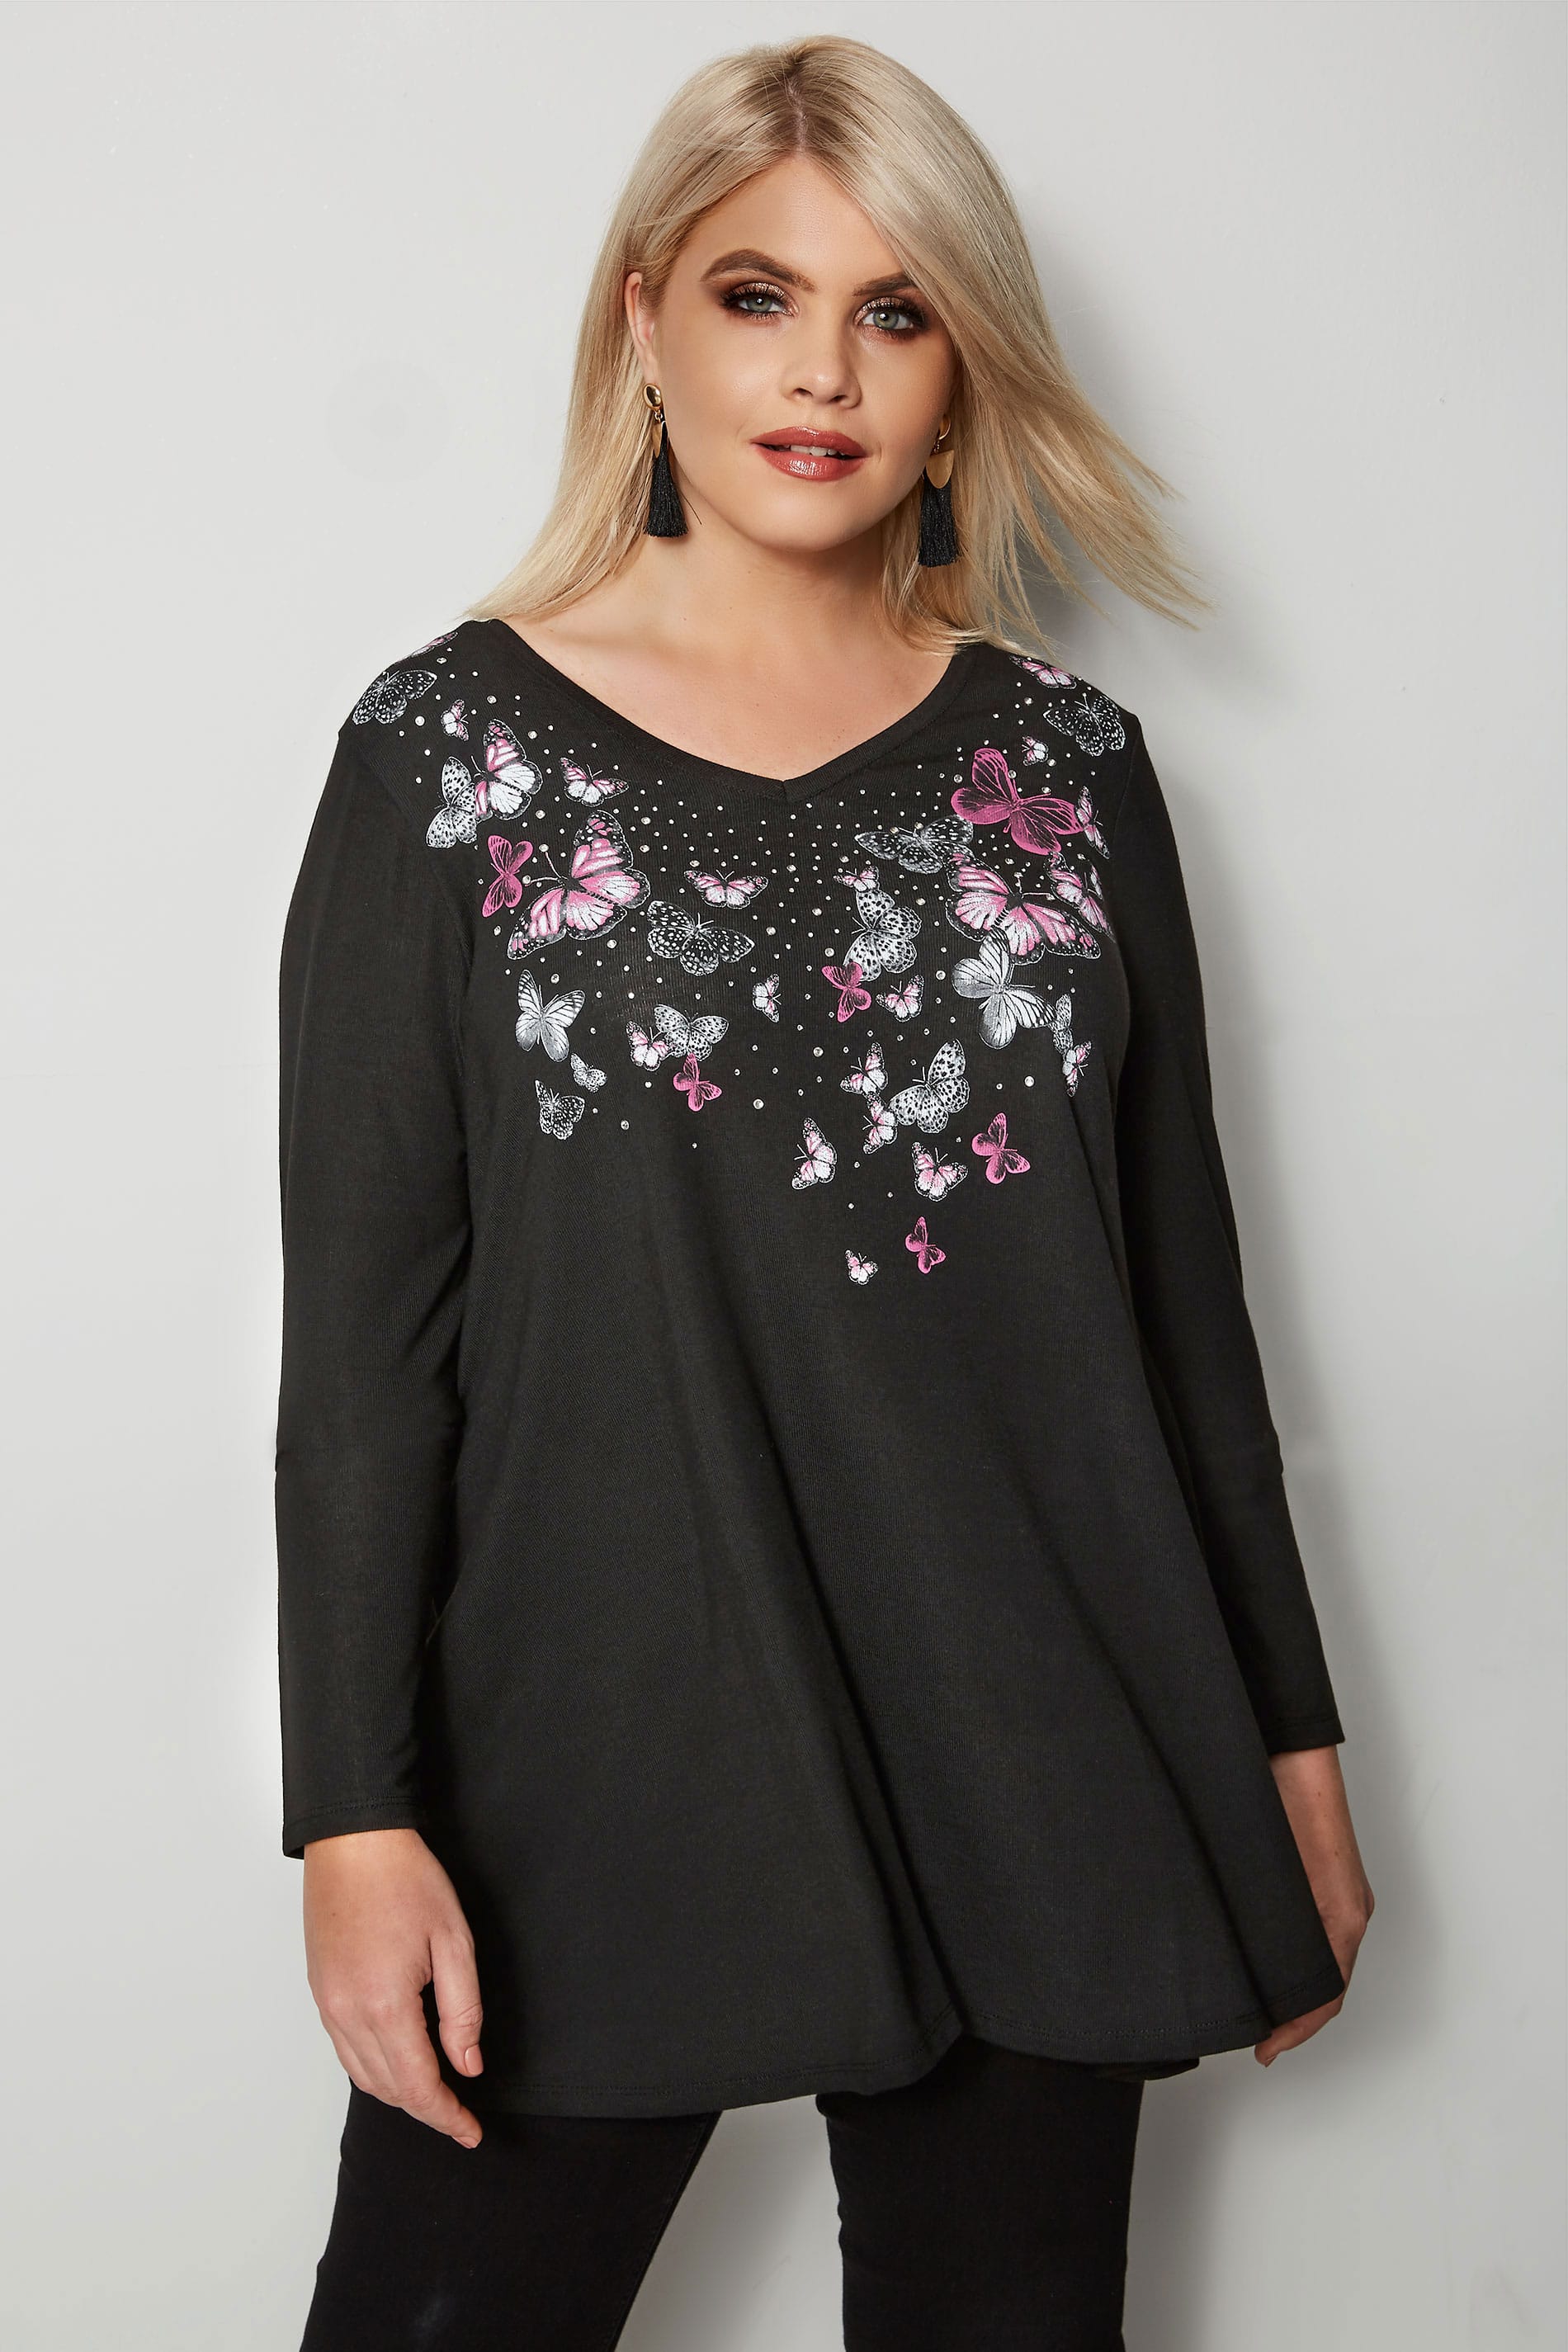 Black Studded Butterfly Swing Top, Plus size 16 to 36 | Yours Clothing